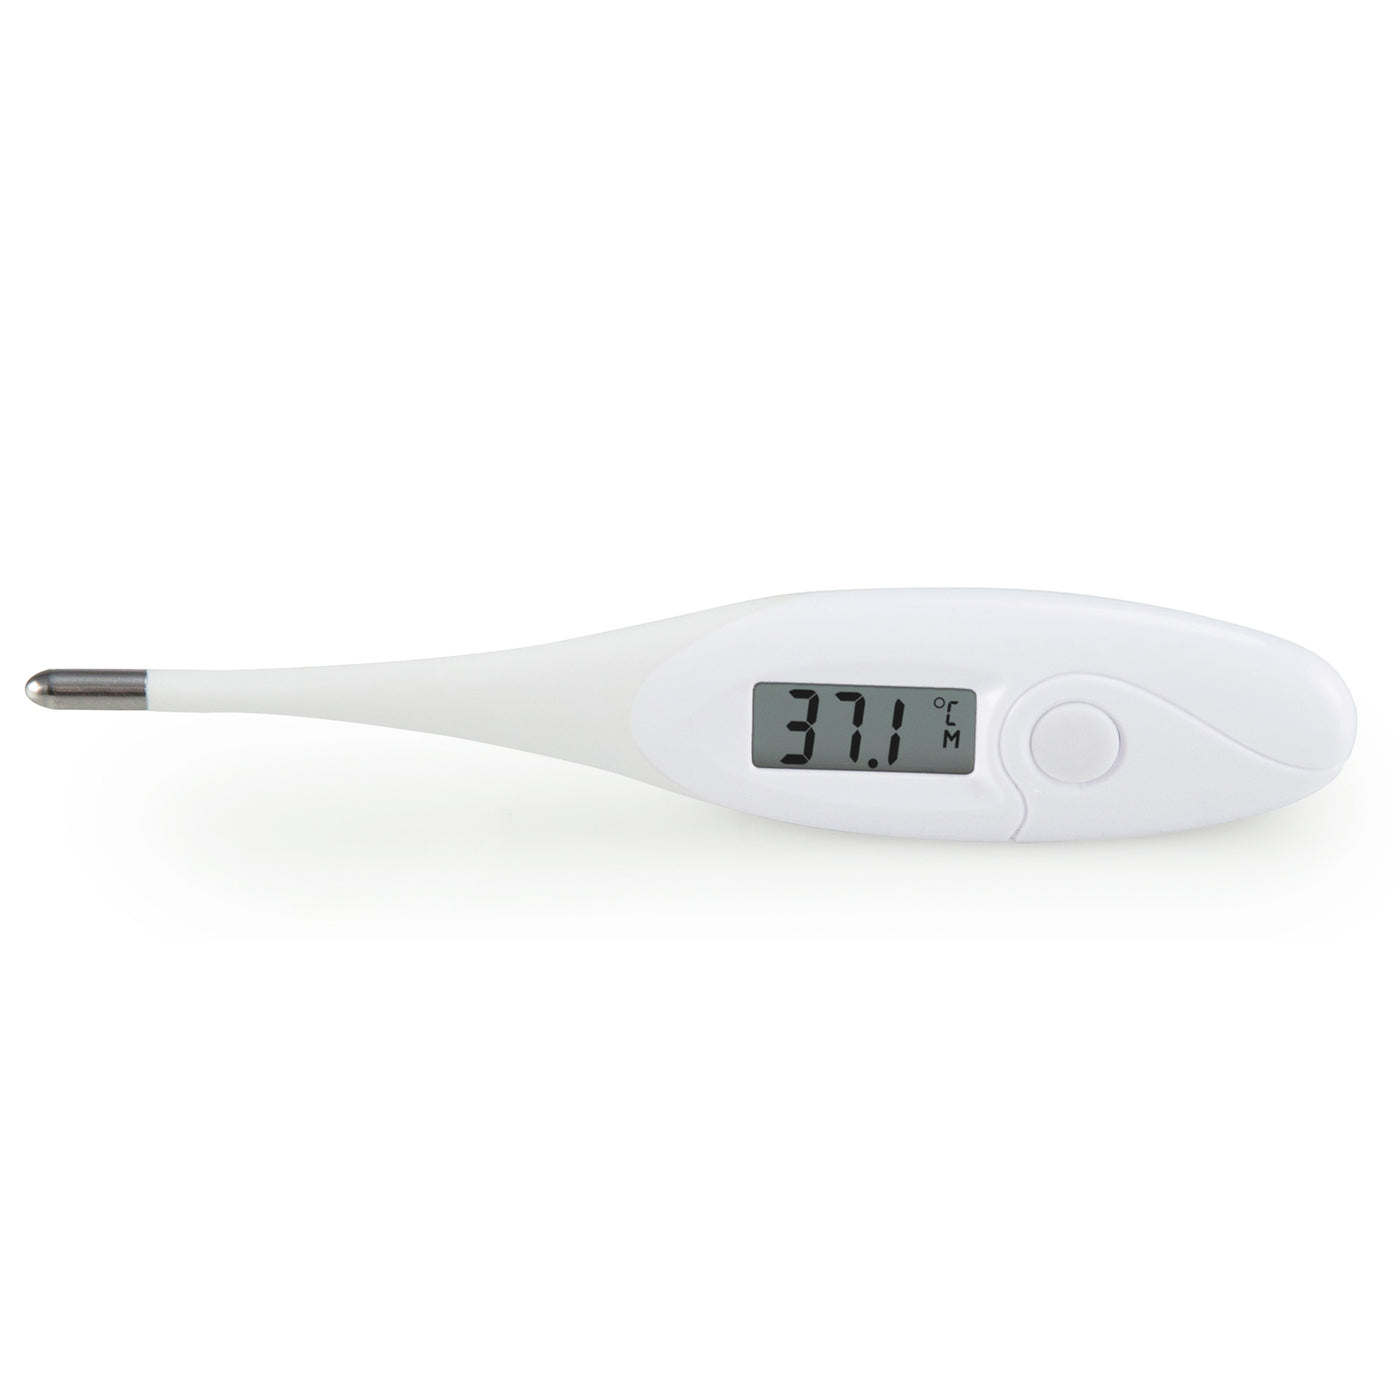 Alecto BC-04 - Baby thermometer 2 piece set, white